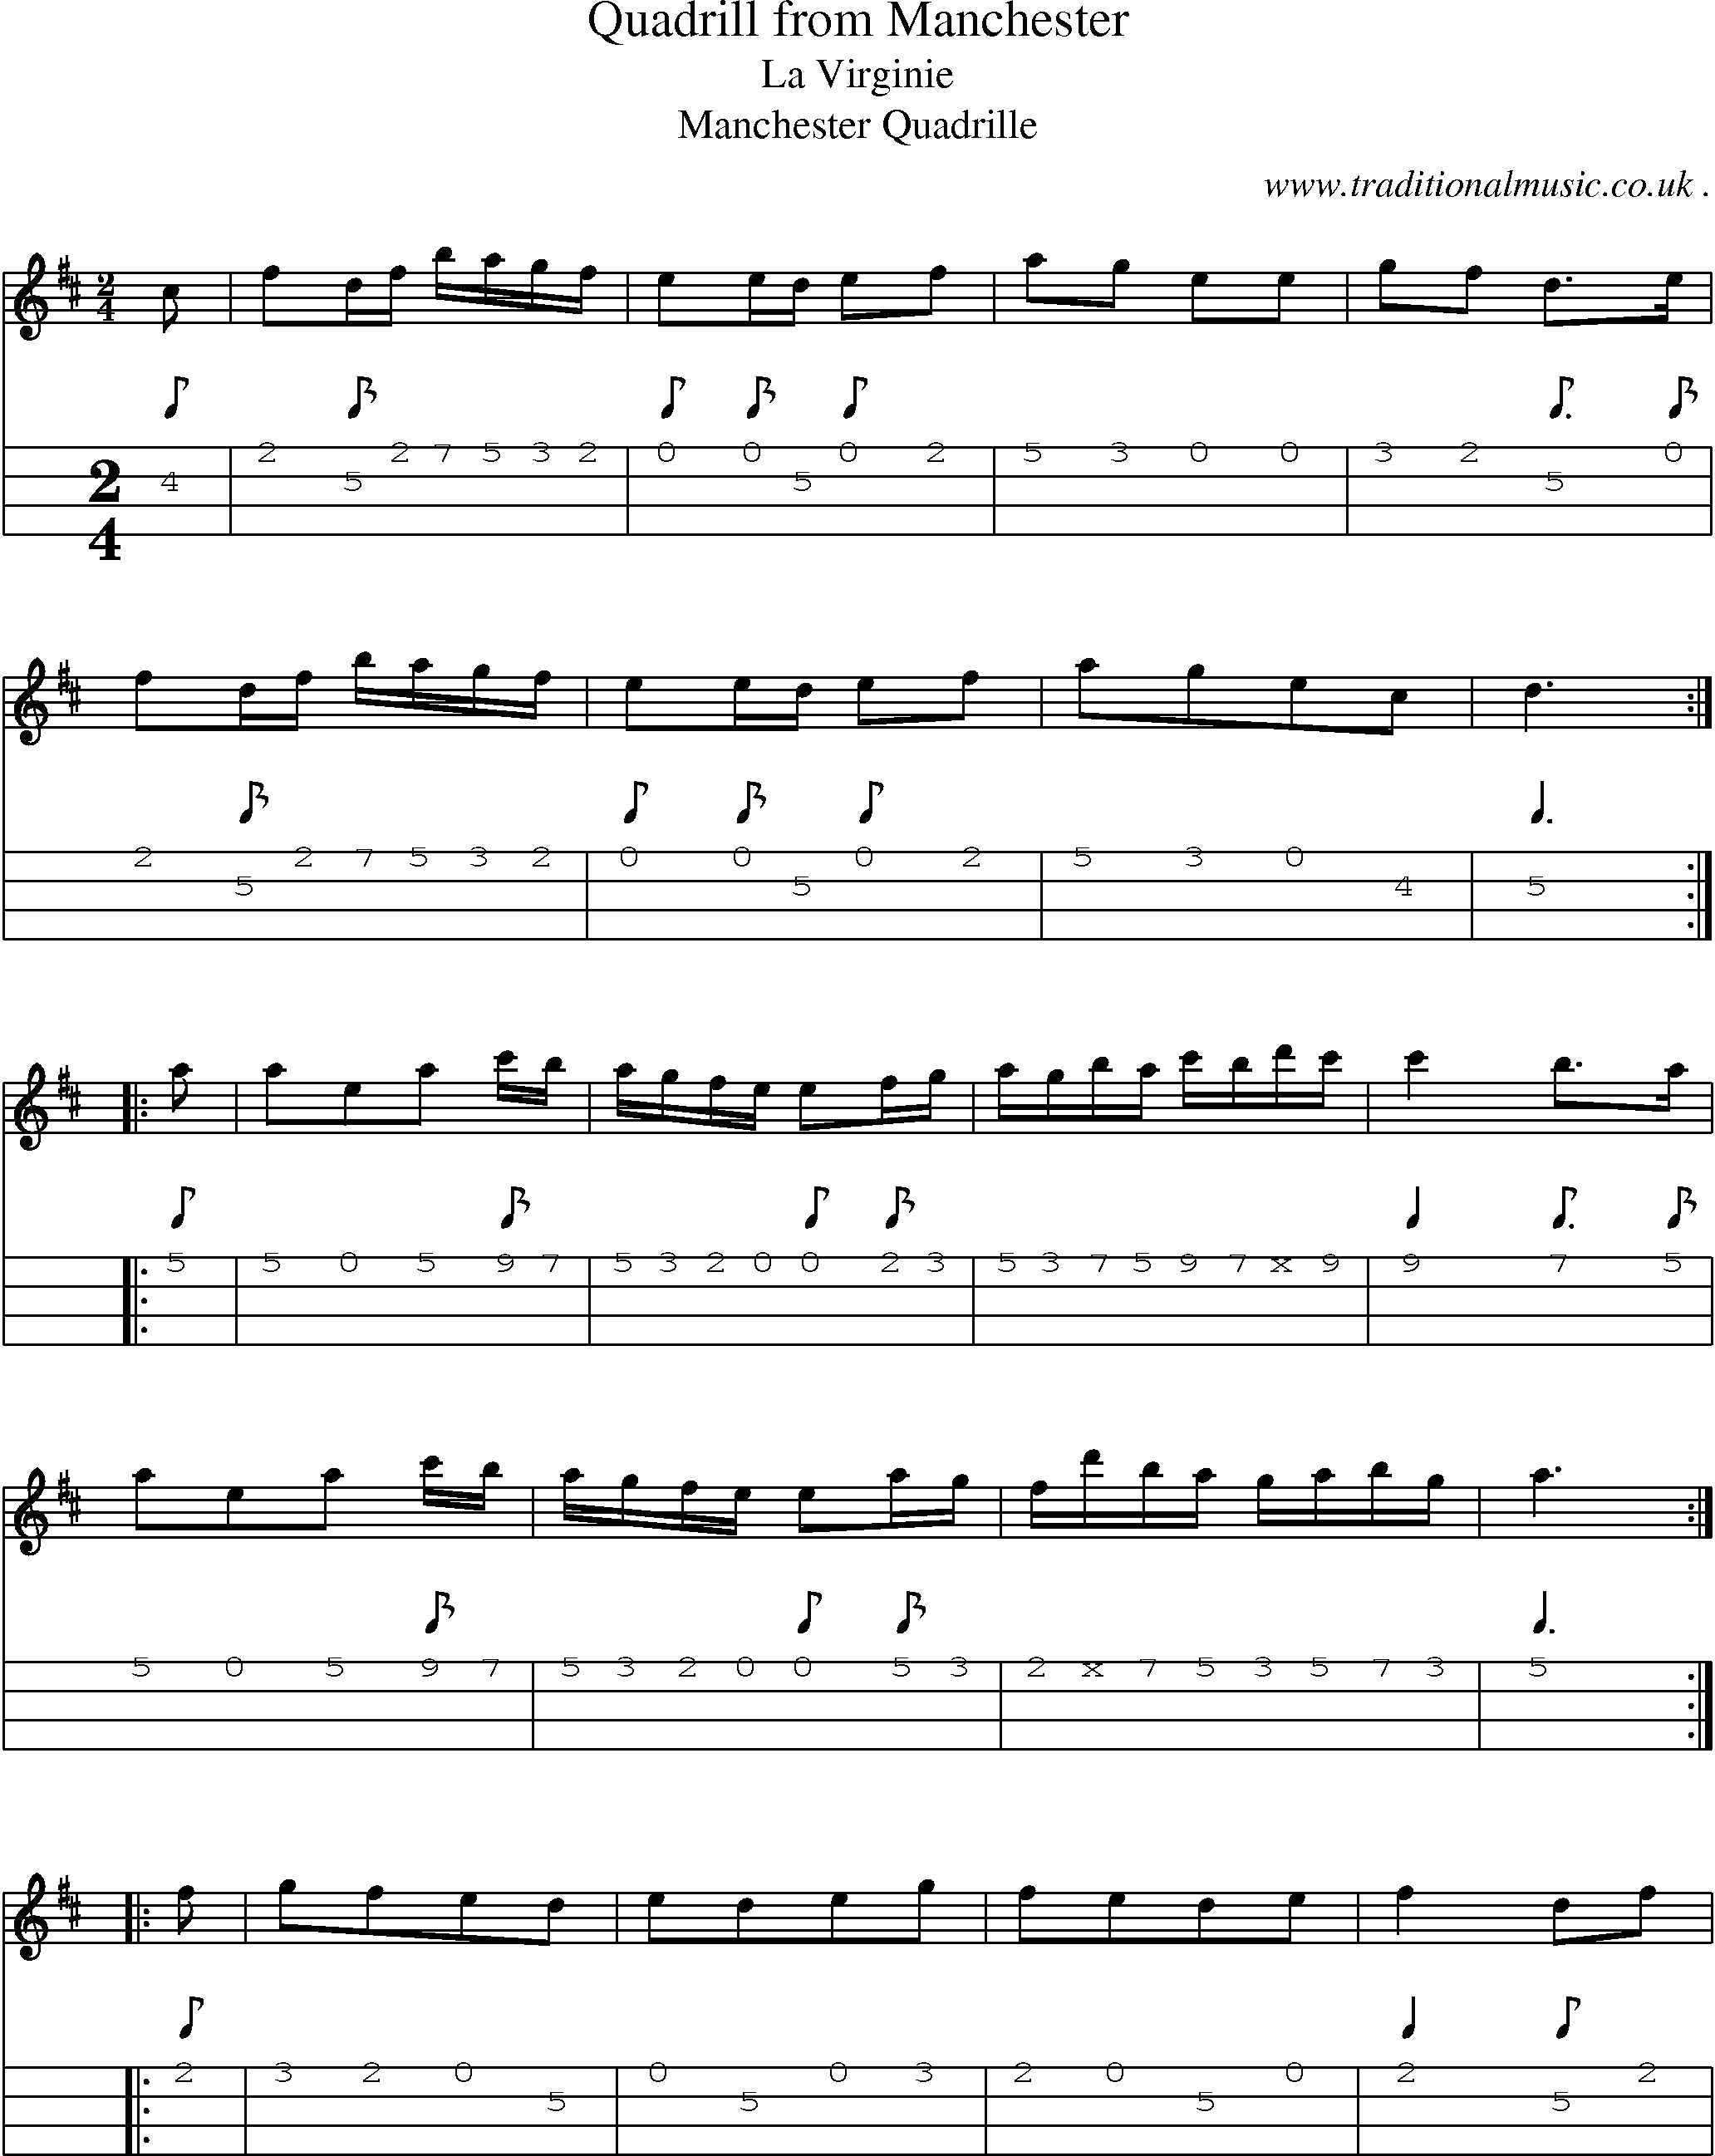 Sheet-Music and Mandolin Tabs for Quadrill From Manchester